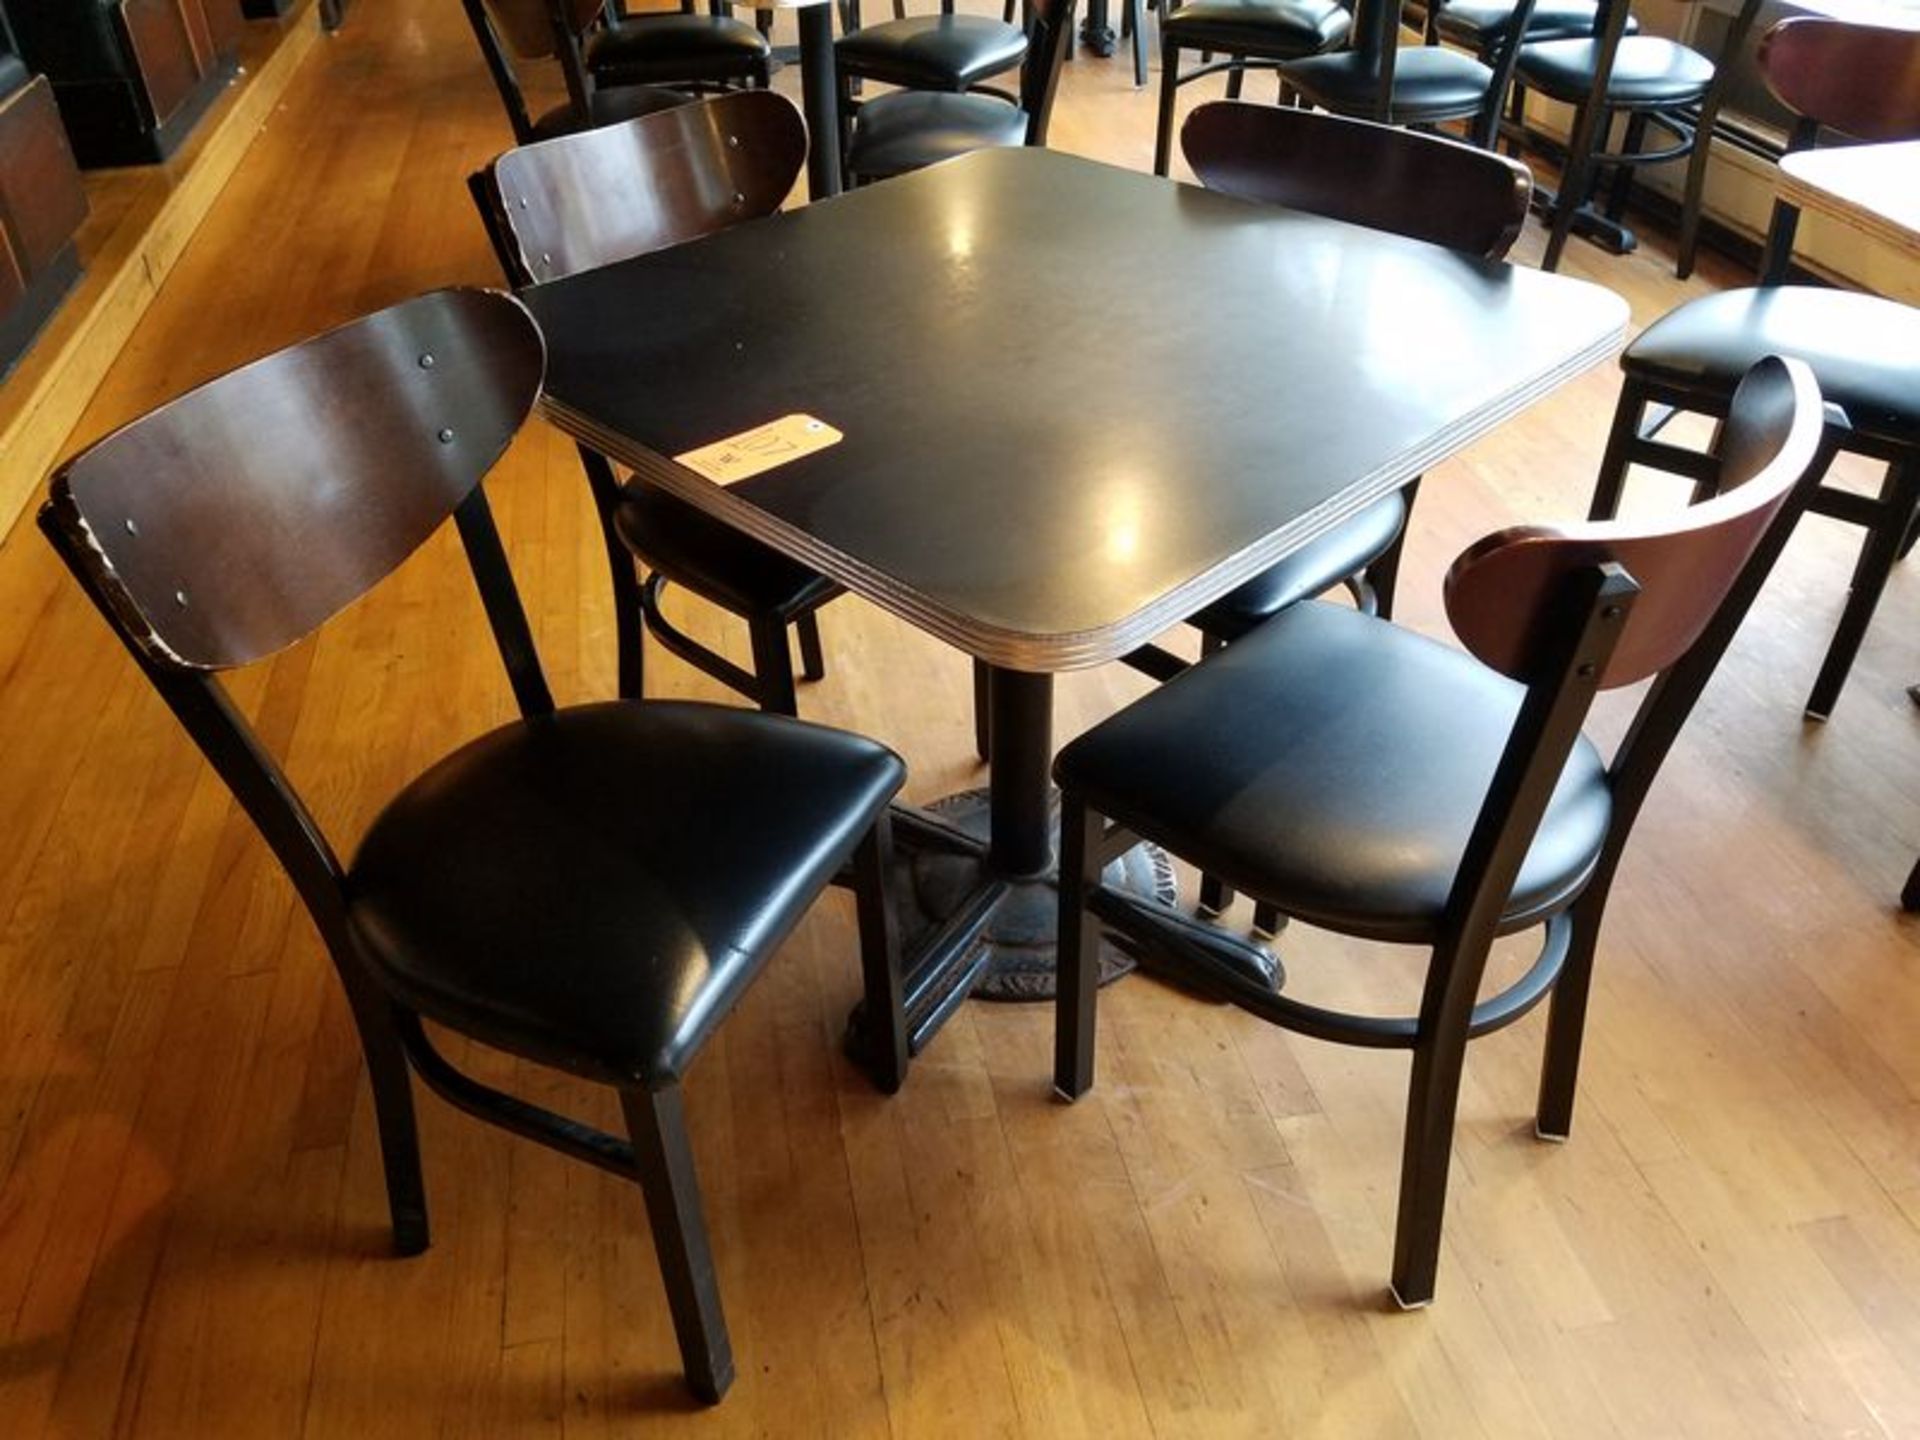 34 in. x 34 in. Art Deco Base Wood Dining Tables; with (4) Chairs, Metal Trim